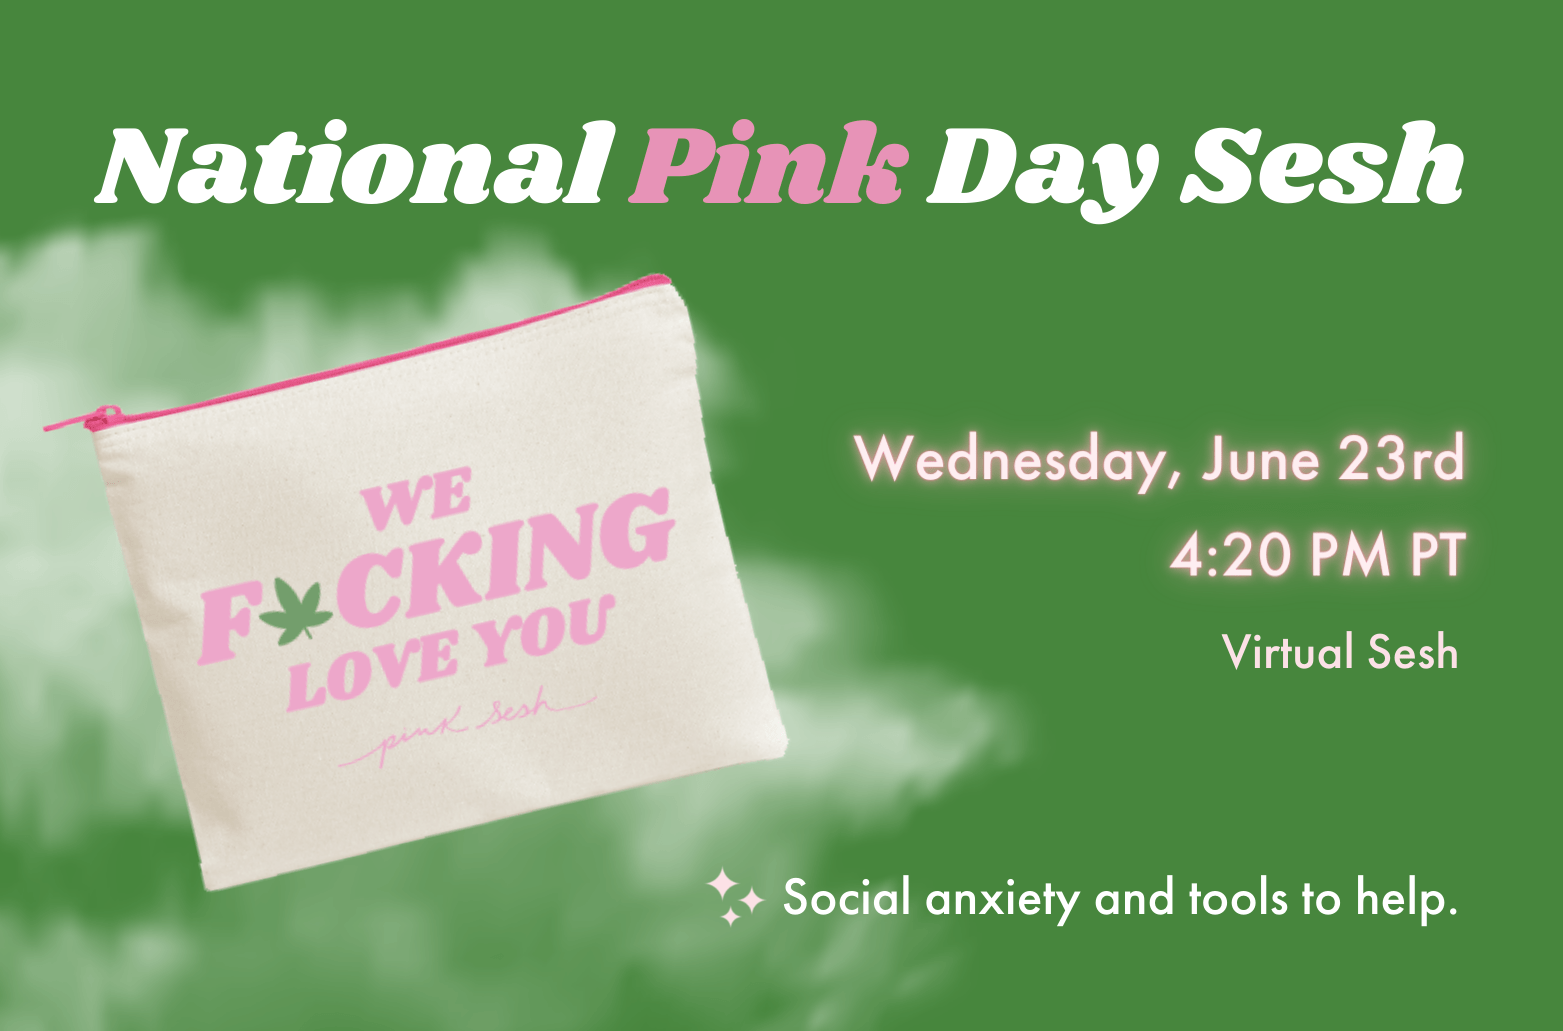 NATIONAL PINK DAY – We F*cking Love You!